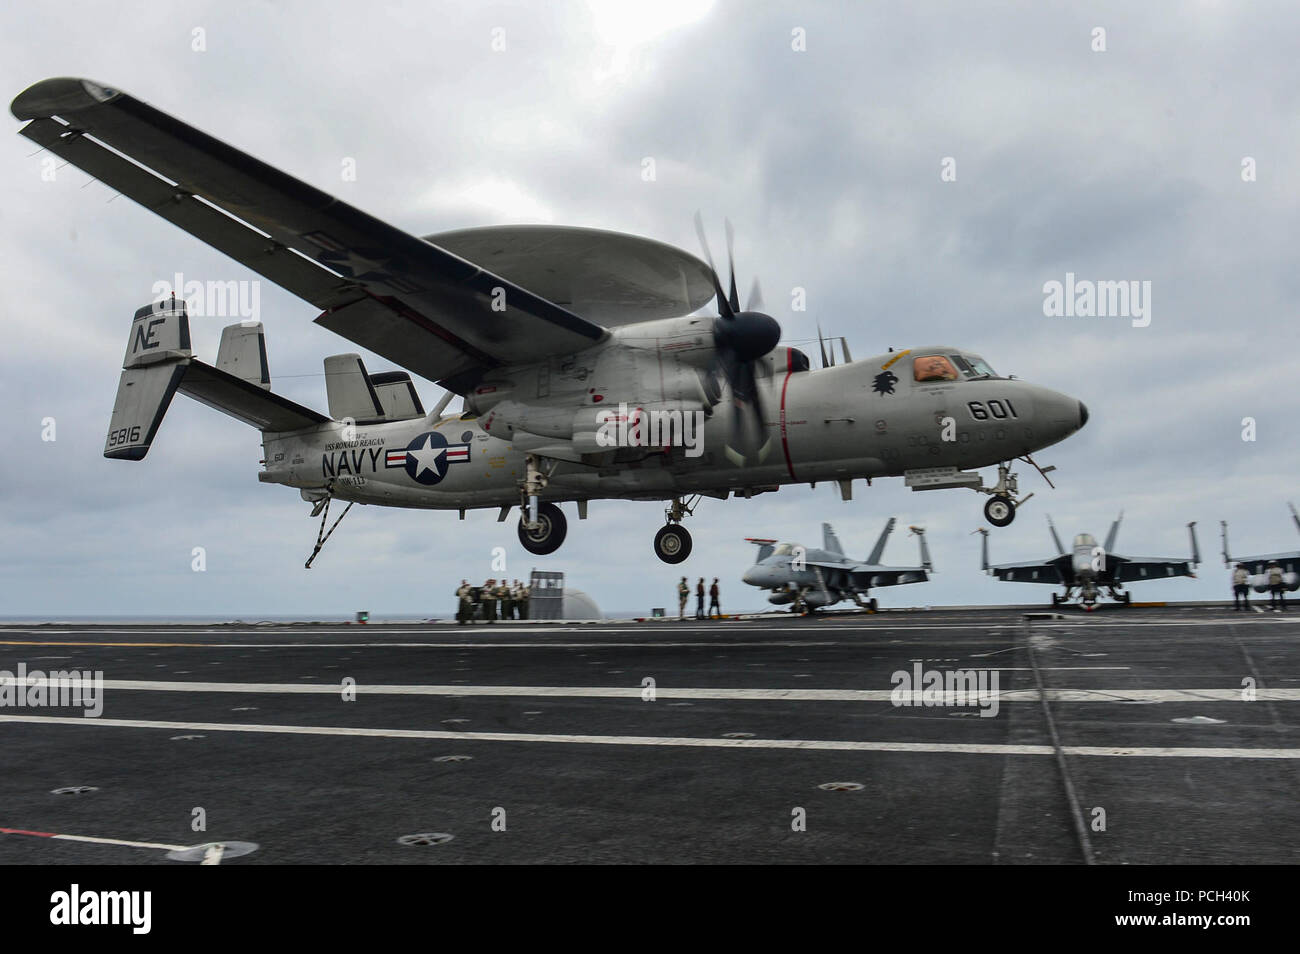 A U.S. Navy E2-C Hawkeye aircraft assigned to Carrier Airborne Early Warning Squadron (VAW) 113 lands aboard the aircraft carrier USS Ronald Reagan (CVN 76) March 24, 2014, in the Pacific Ocean. Stock Photo